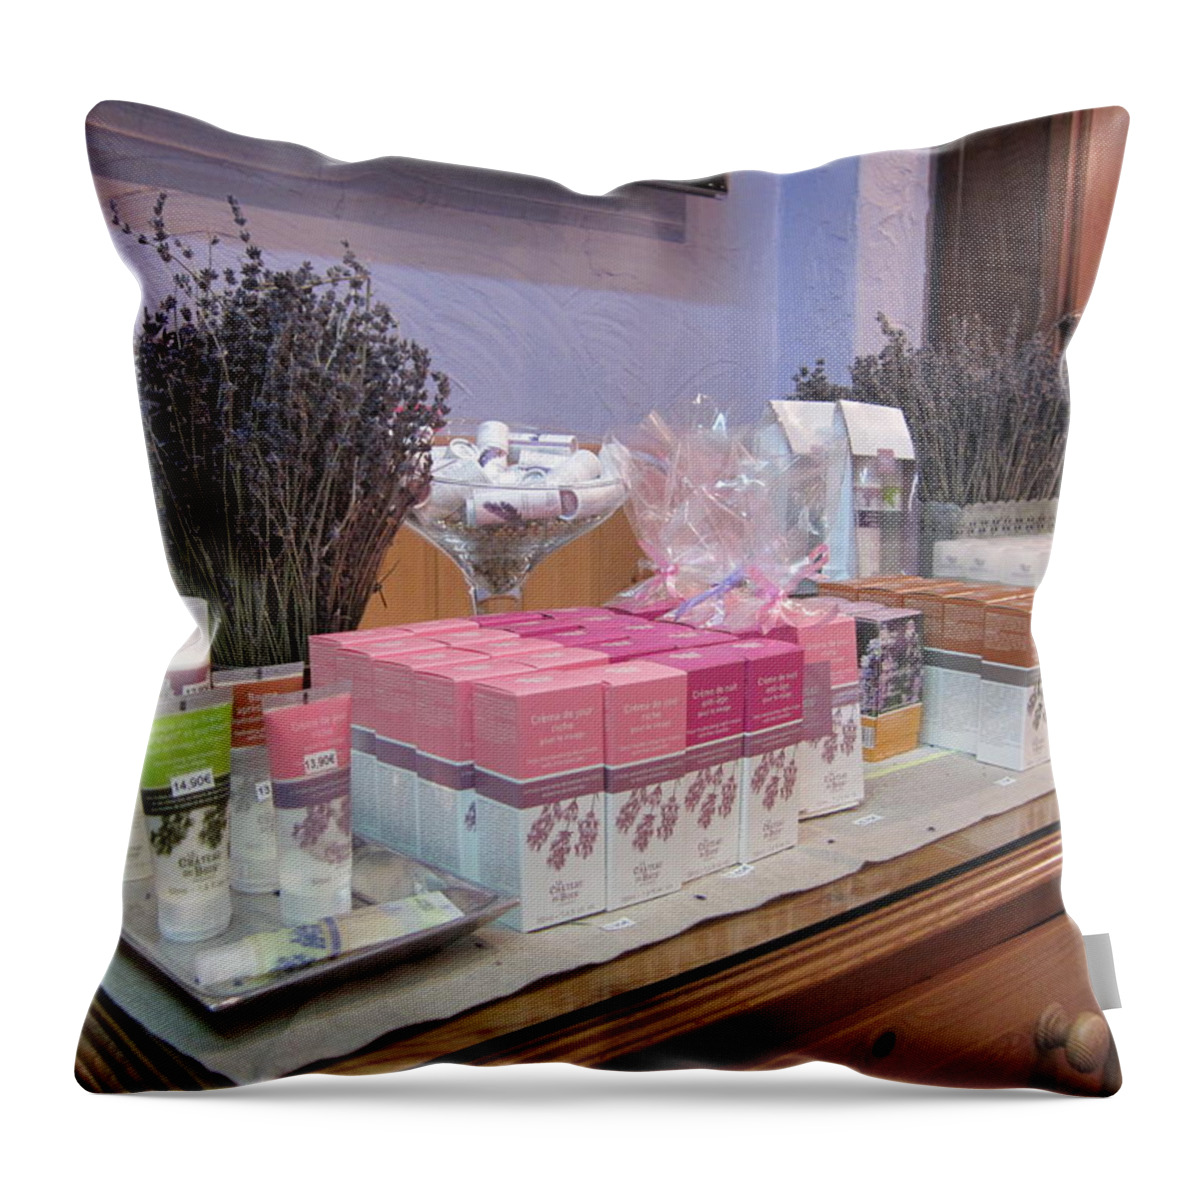 Lavender Throw Pillow featuring the photograph Lavender Museum Shop 2 by Pema Hou